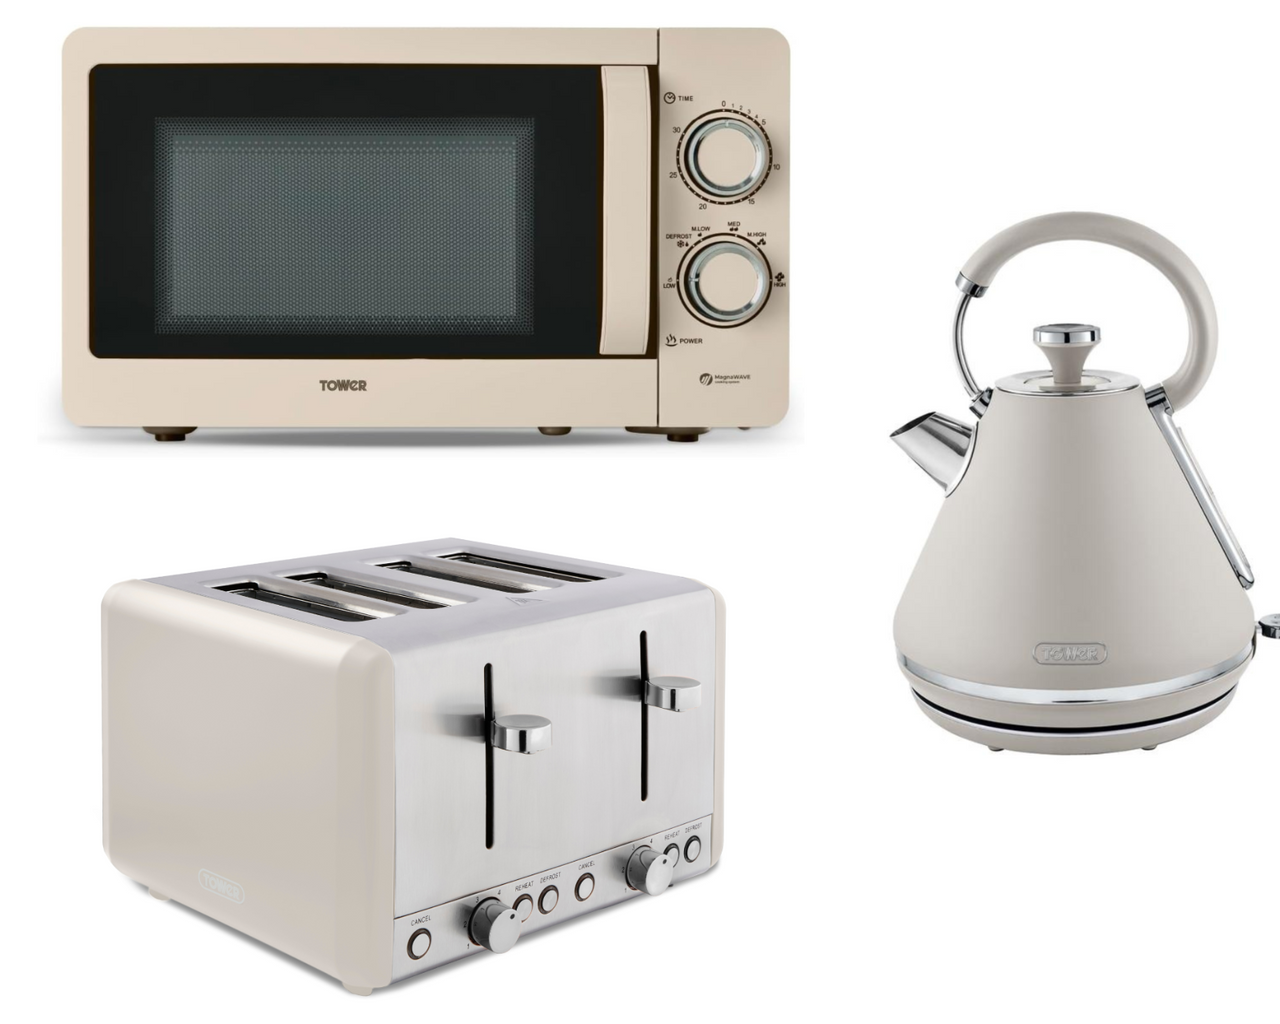 Tower Cavaletto Latte Pyramid Kettle, 4 Slice Toaster & 800W 20L Manual Microwave. Contemporary Matching Set in Latte